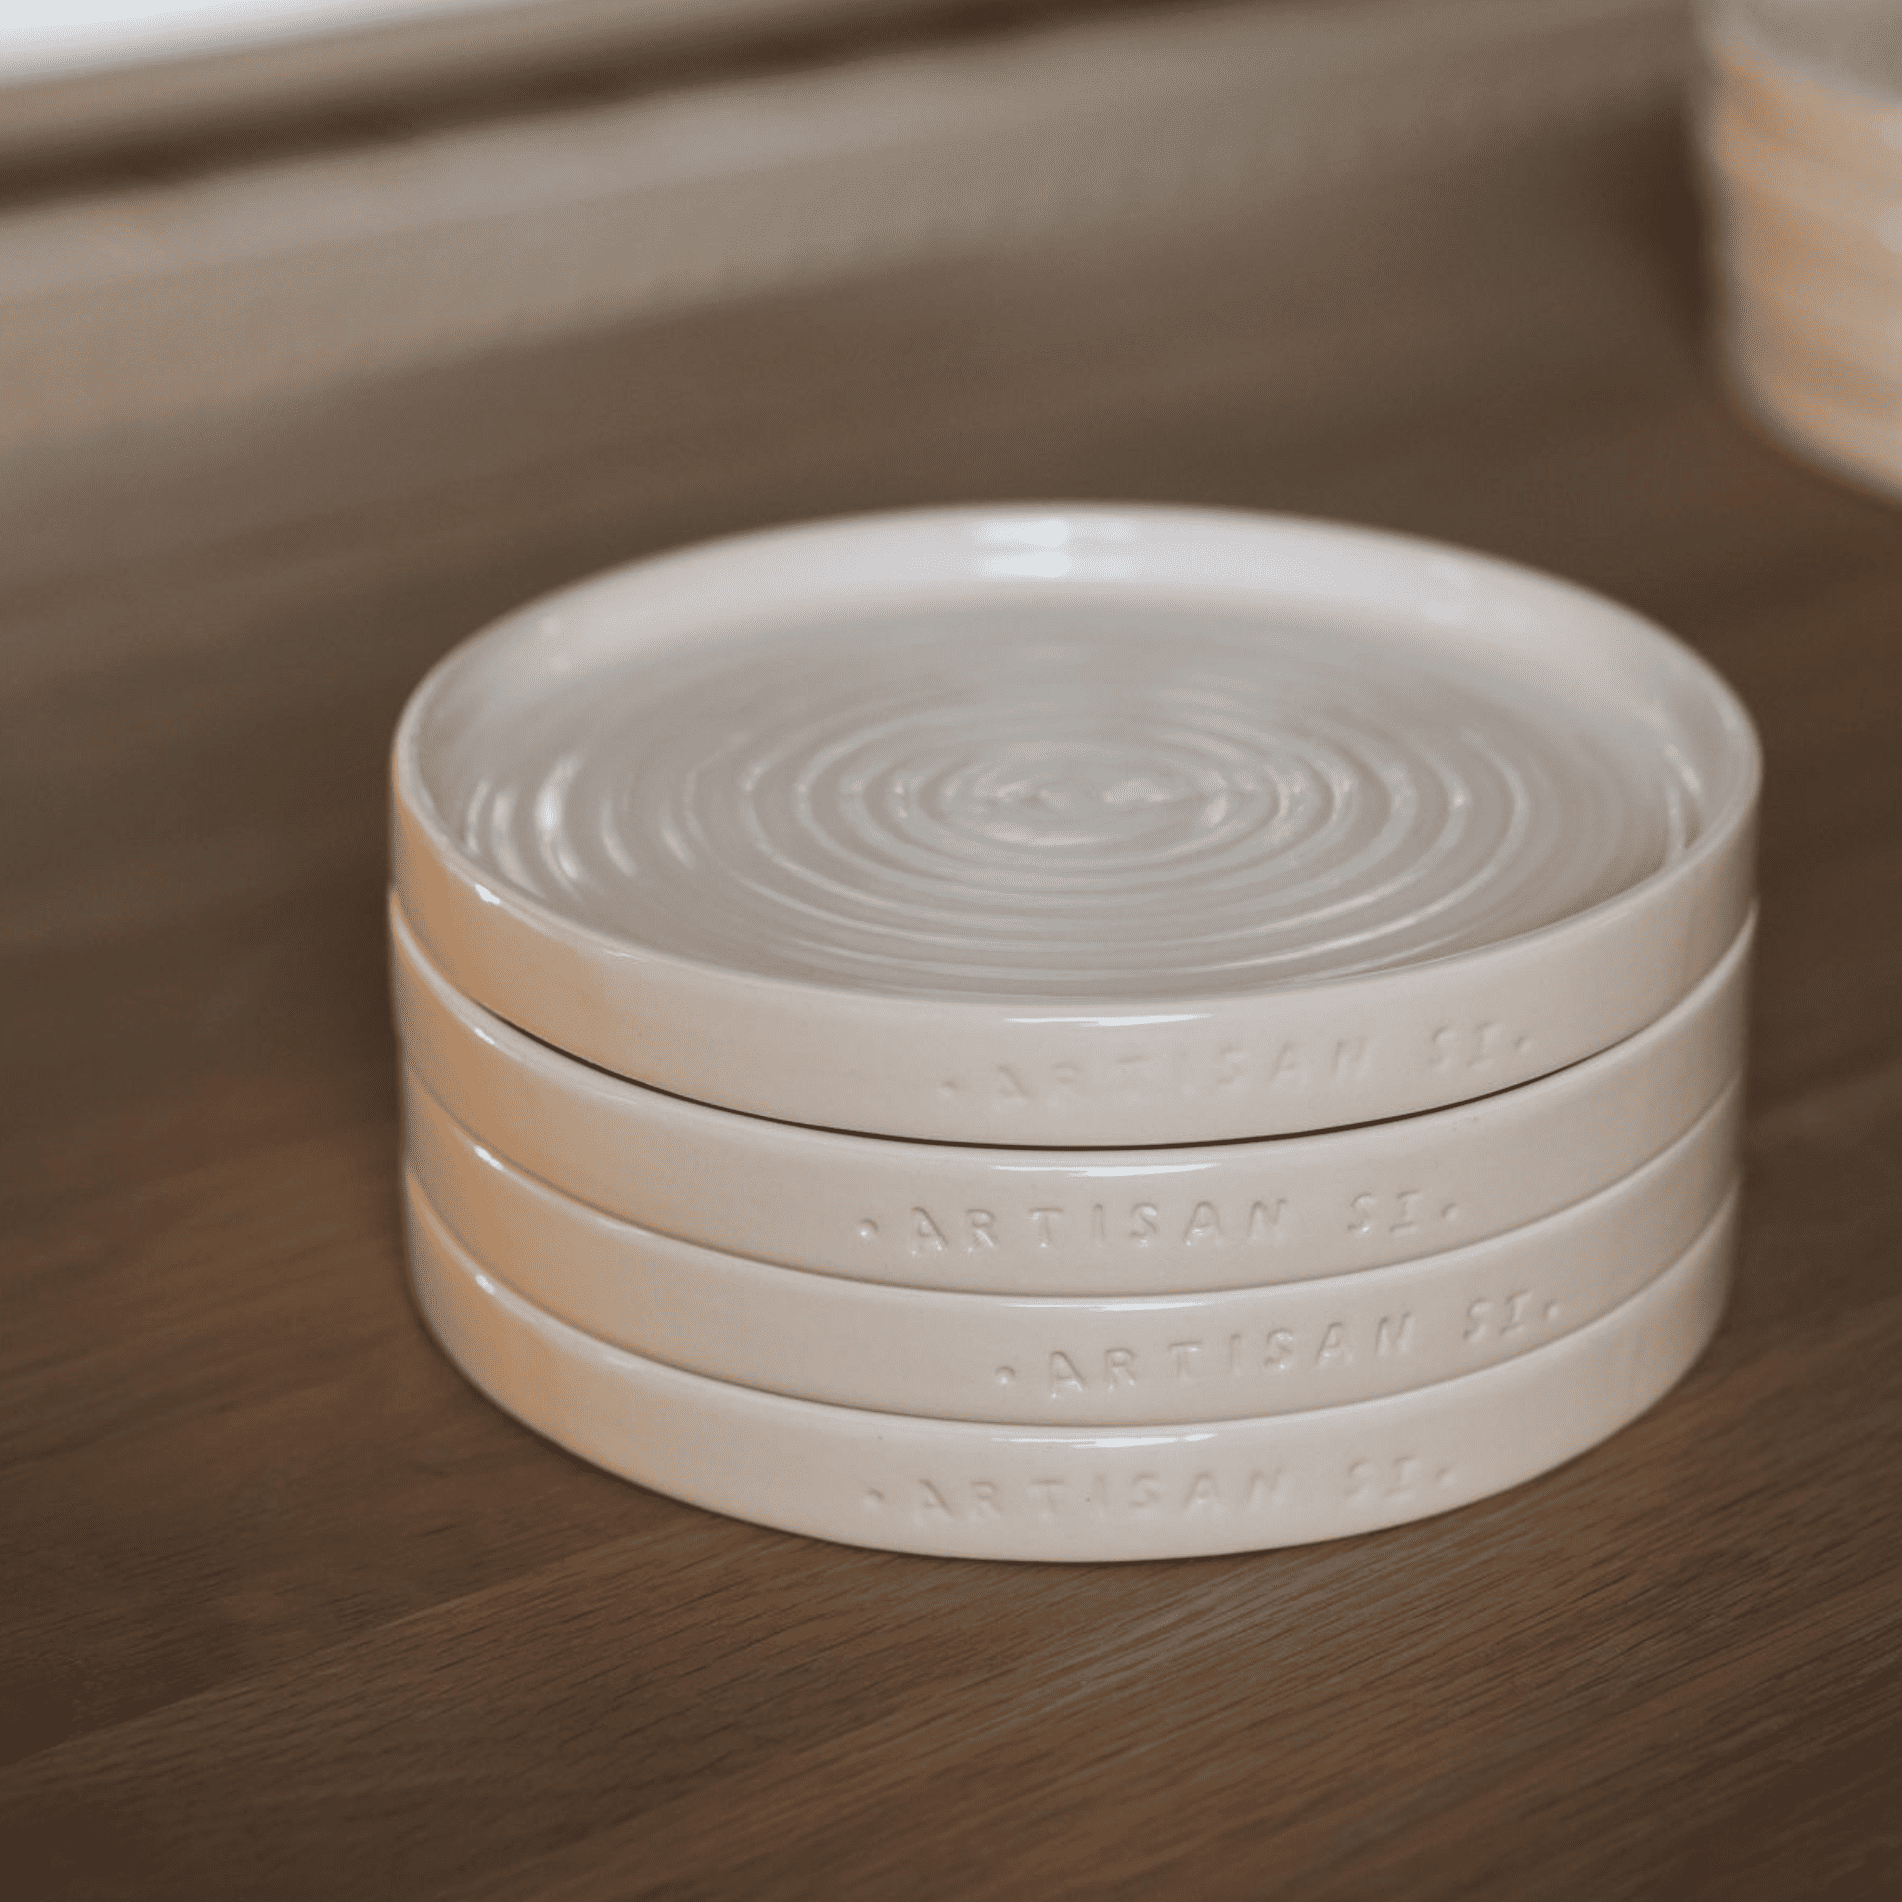 Stack of Side Plates on wooden table.